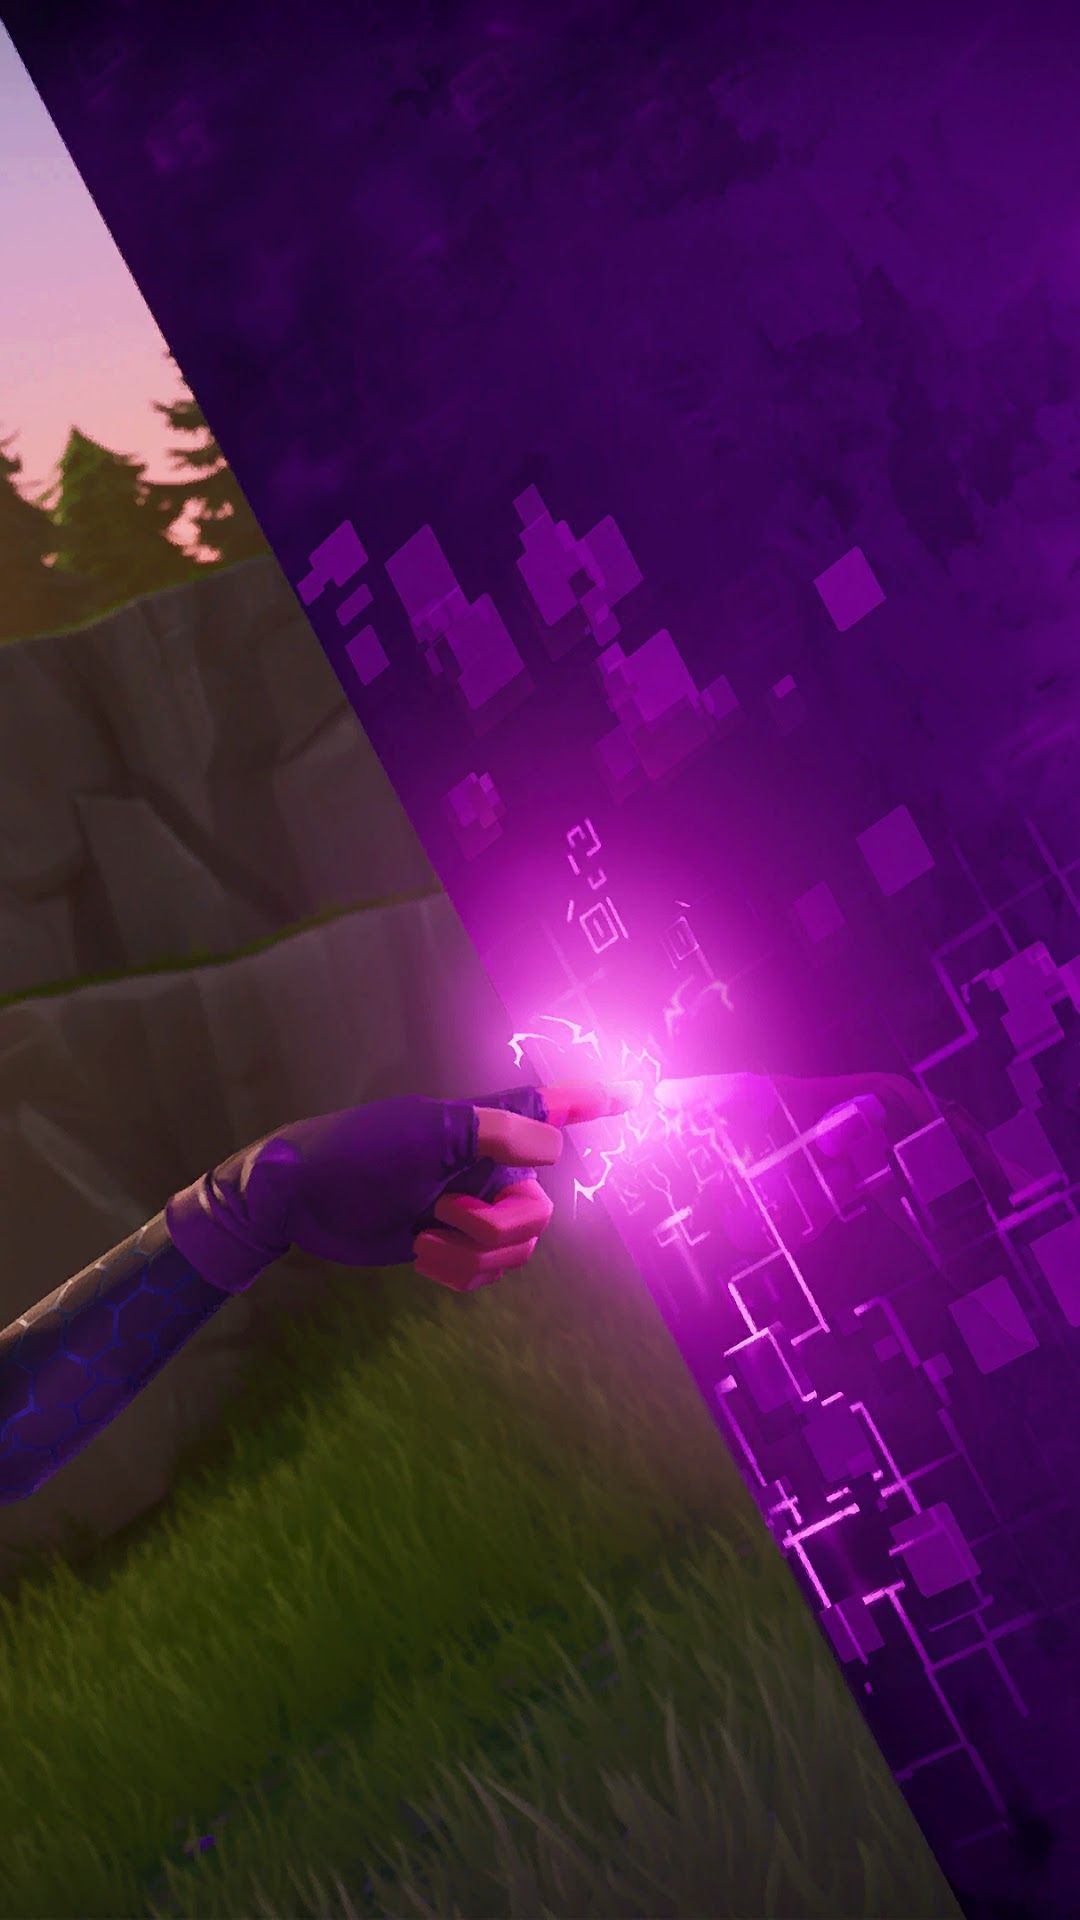 Fortnite Battle Royale, Brite Bomber, Dark Bomber phone HD Wallpaper, Image, Background, Photo and Picture. Mocah.org HD Wallpaper